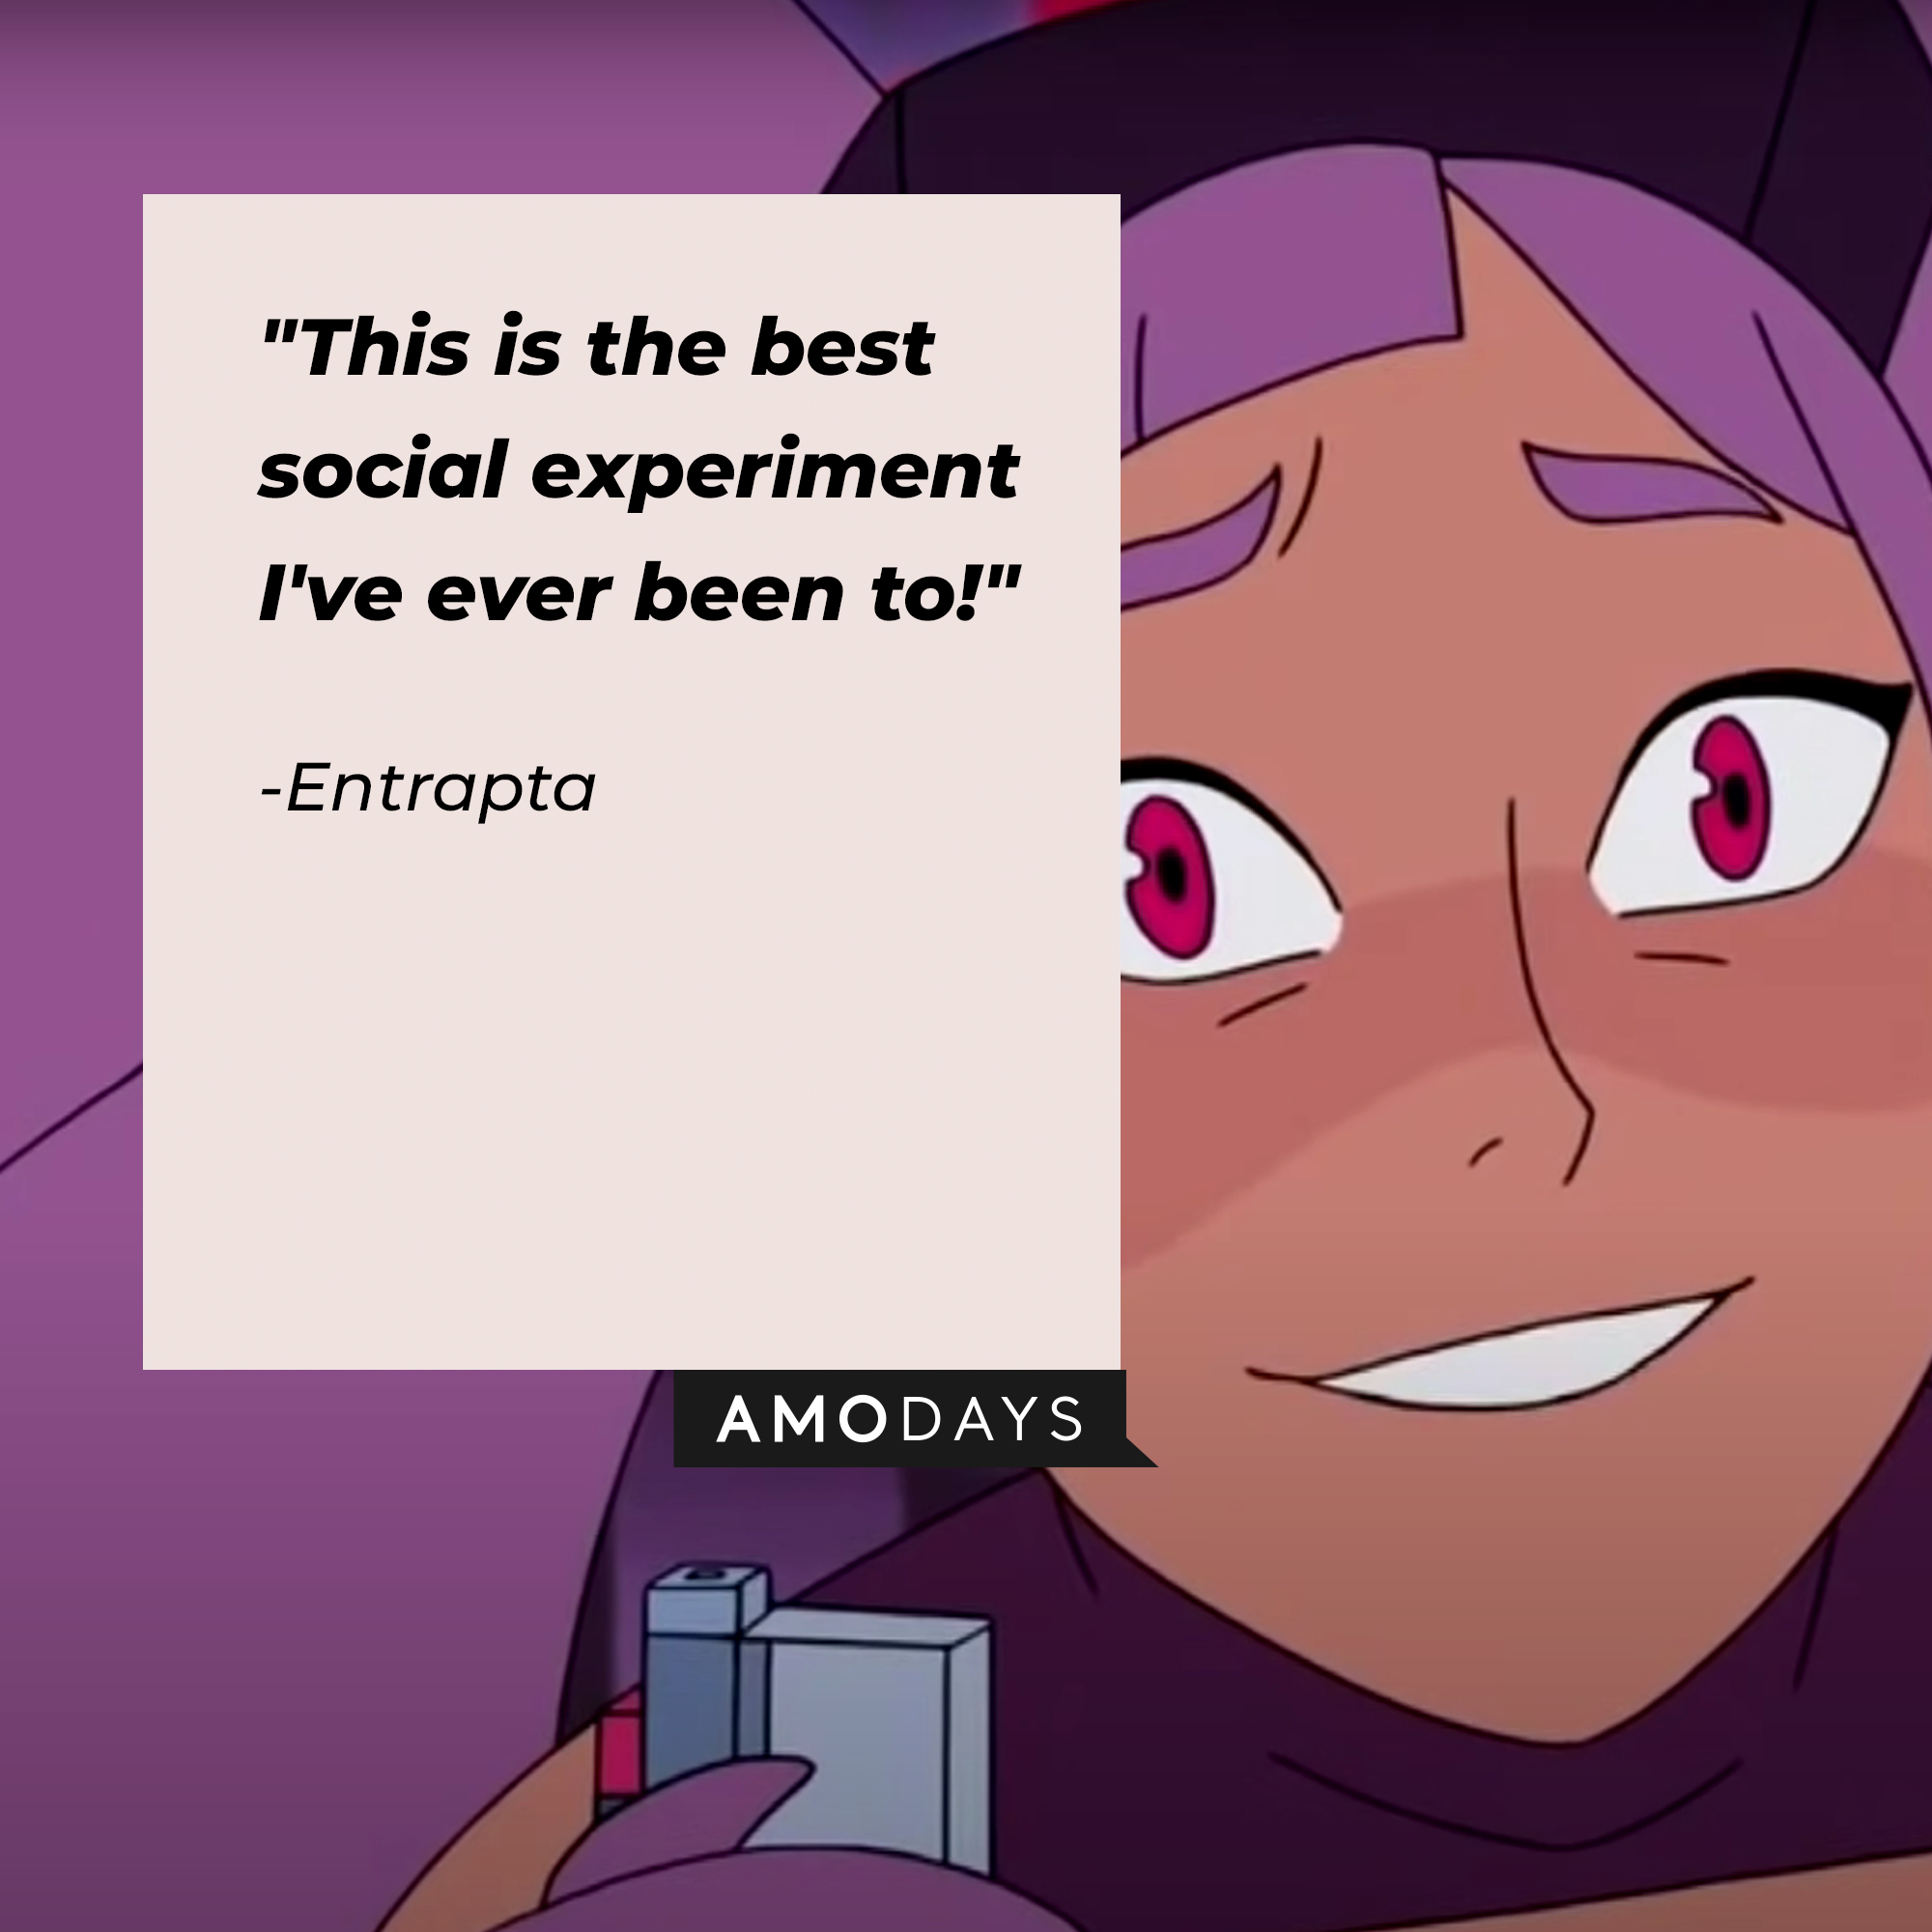 Entrapta's quote: This is the best social experiment I've ever been to!" | Source: youtube.com/netflixafterschool